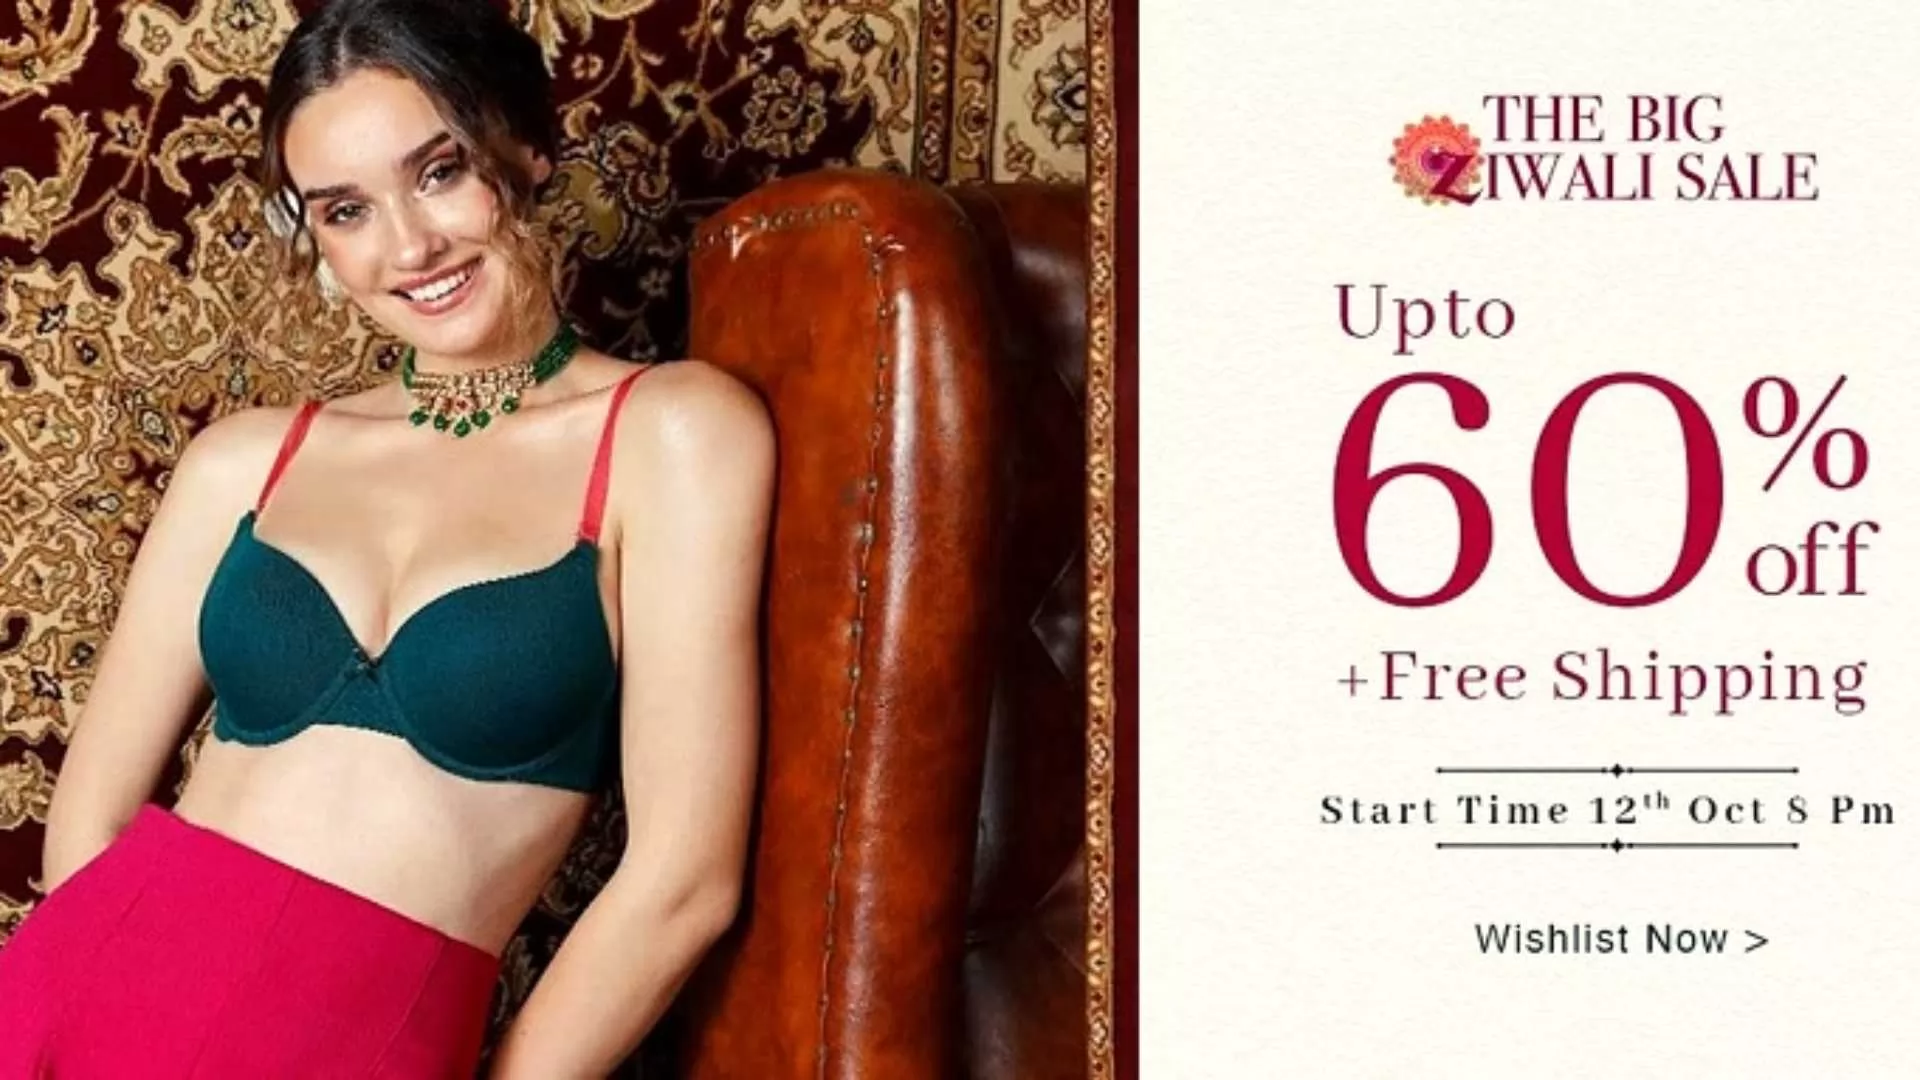 Zivame - The Big Ziwali Sale is NOW LIVE. Revamp your wardrobe with festive  styles in celebratory colours! Upto 60% off + FREE Shipping across  lingerie, activewear, shapewear, sleepwear, makeup & jewellery!